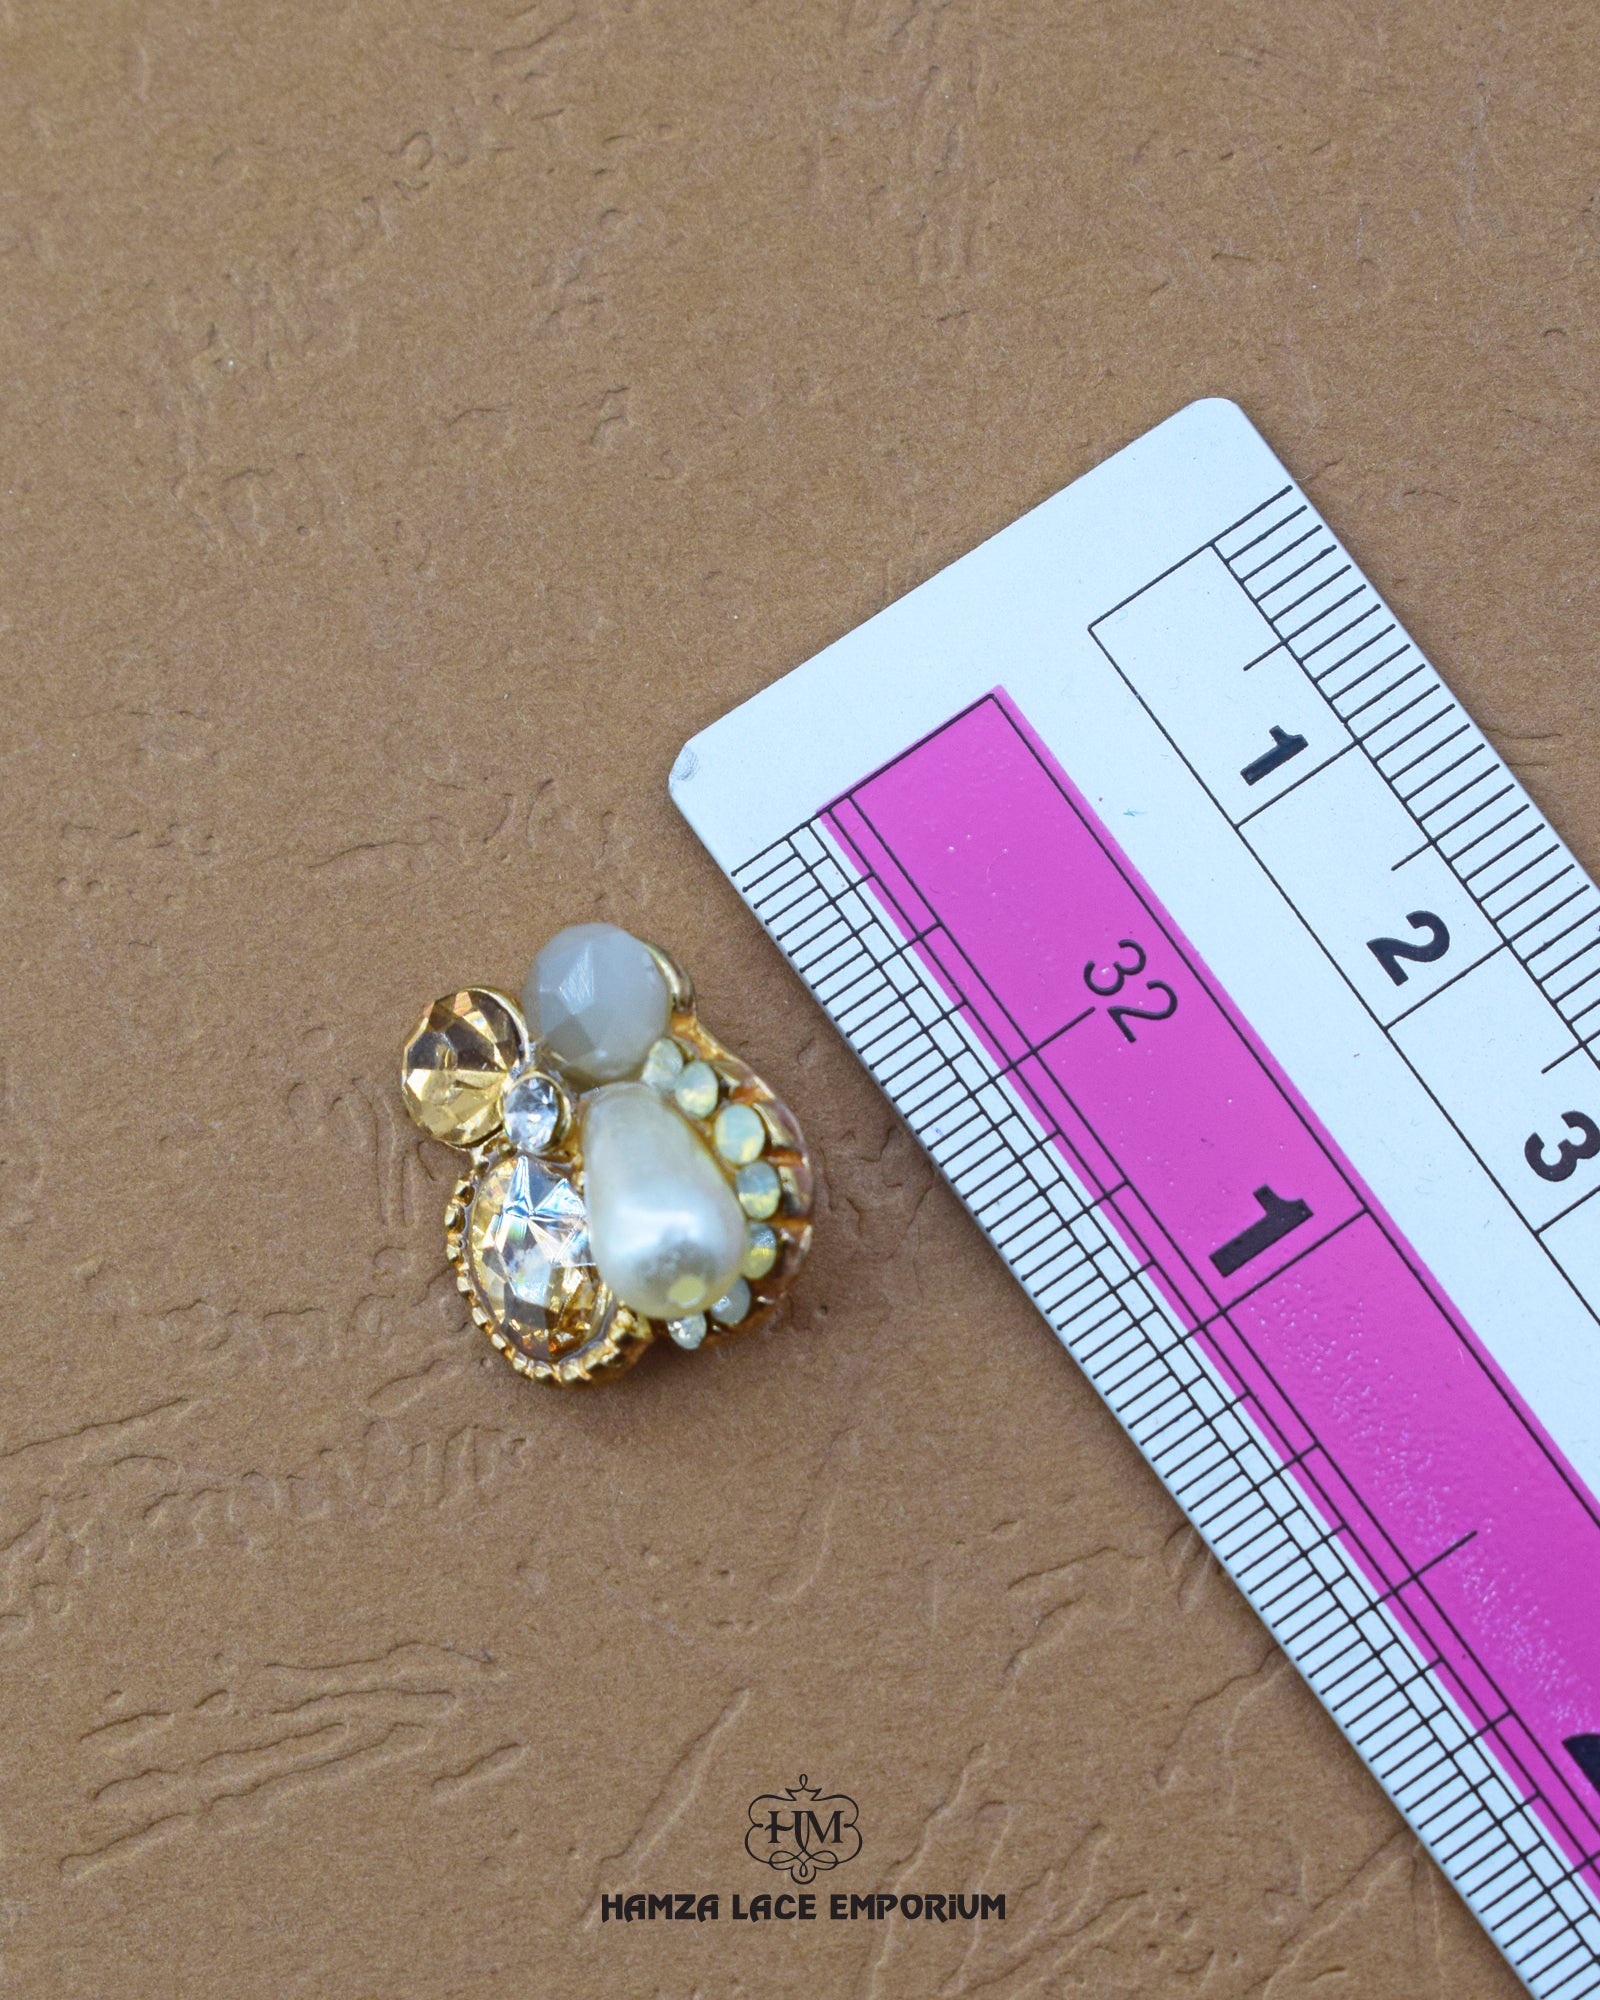 'Fancy Button 173FBC' with ruler for size reference in the product image.